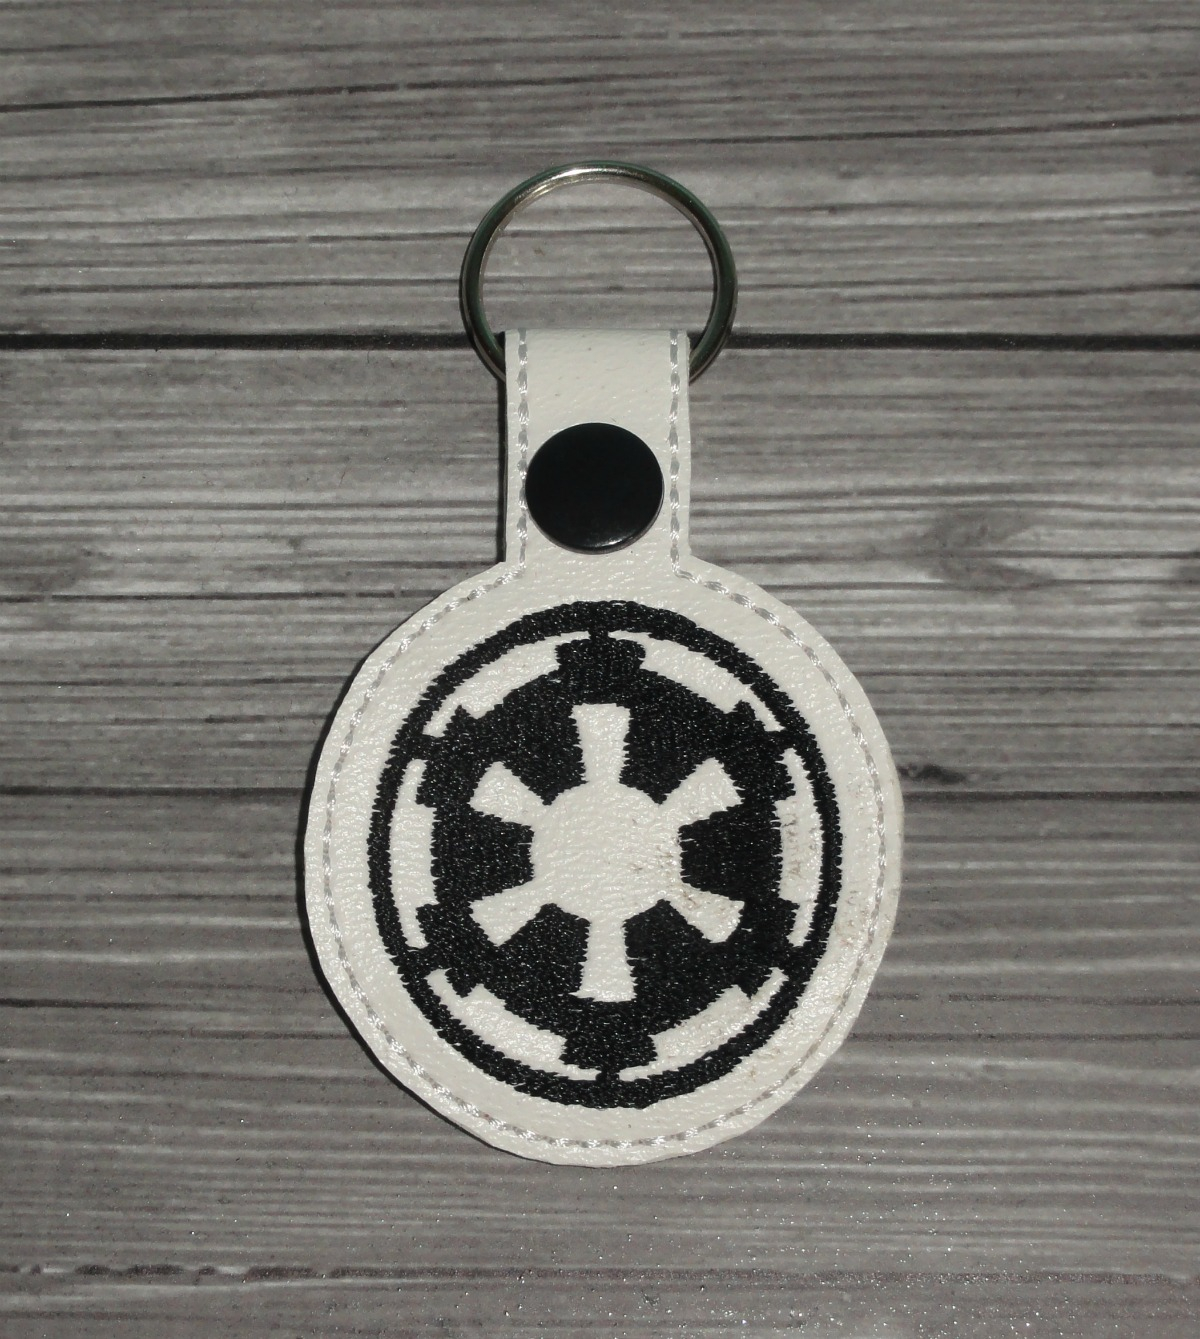 Star Wars Embroidery Pattern Star Wars Imperial Keychain Ith Embroidery Design